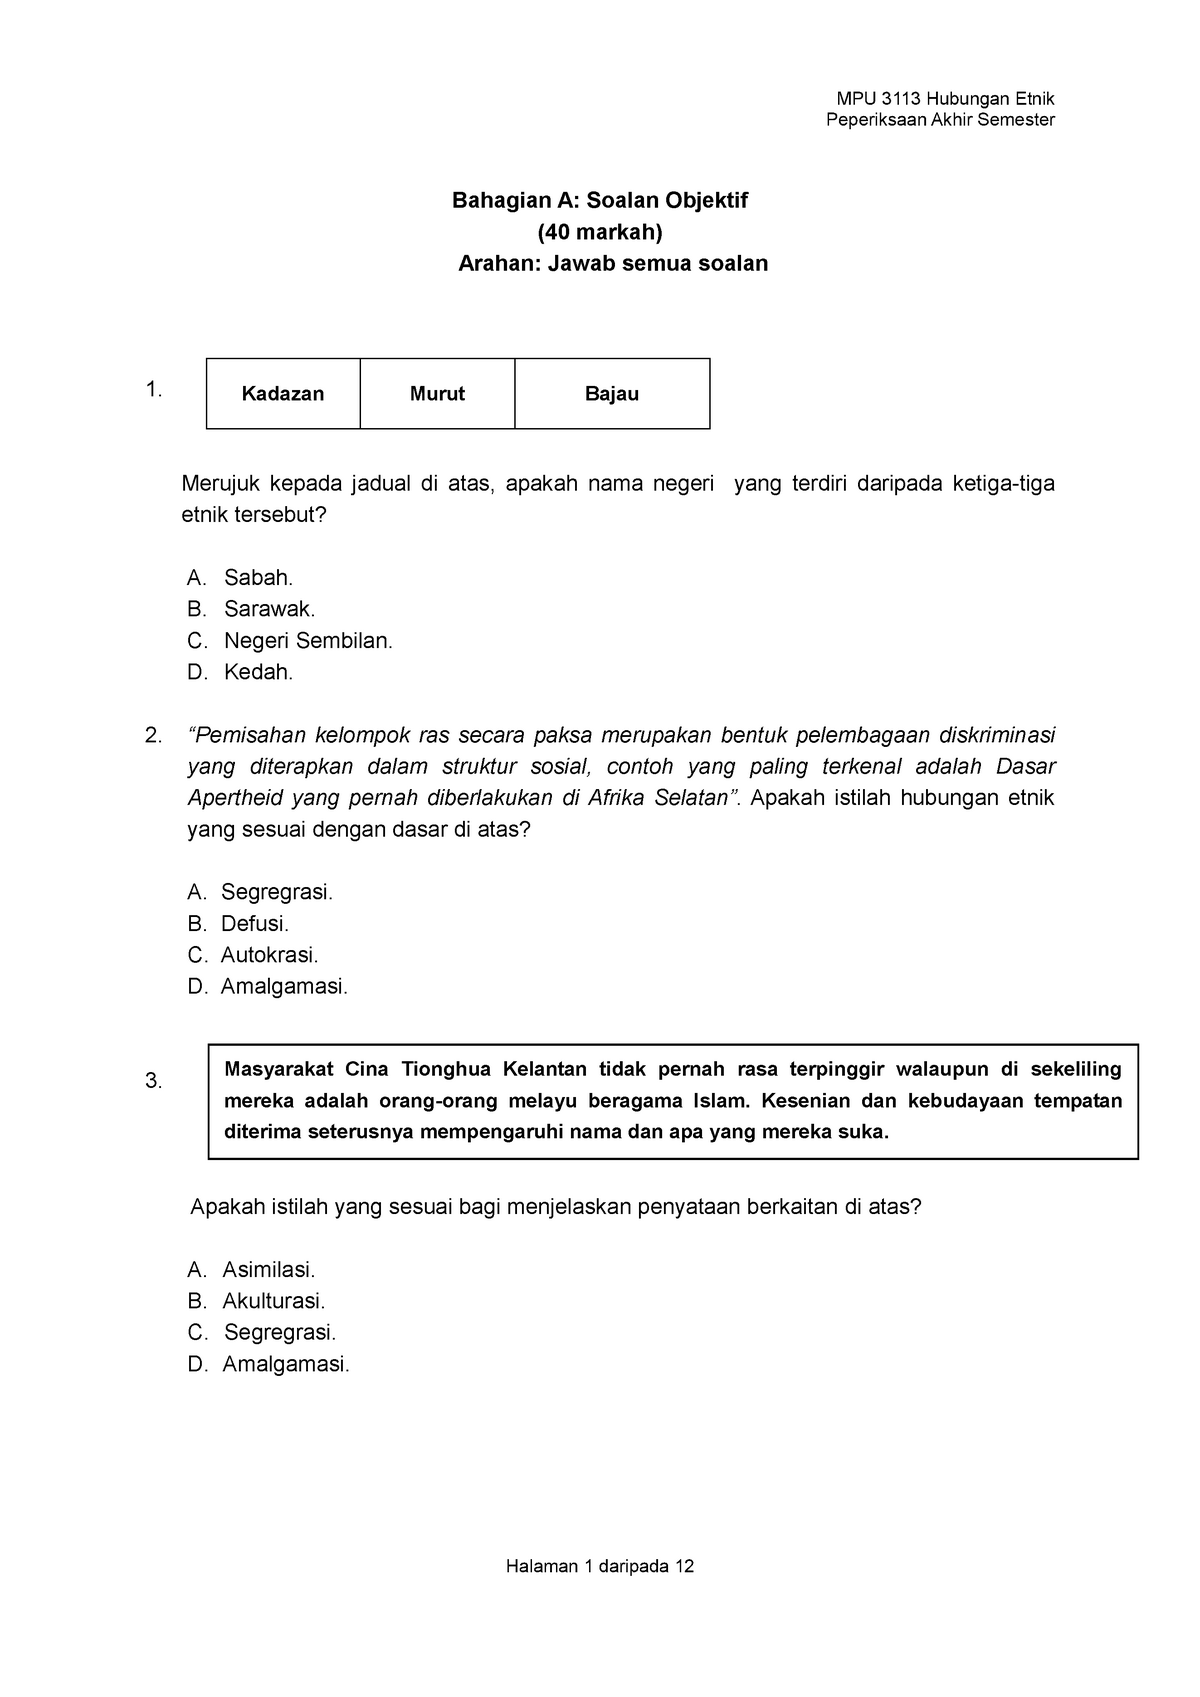 Sample/practice exam, questions and answers - - UNITEN 